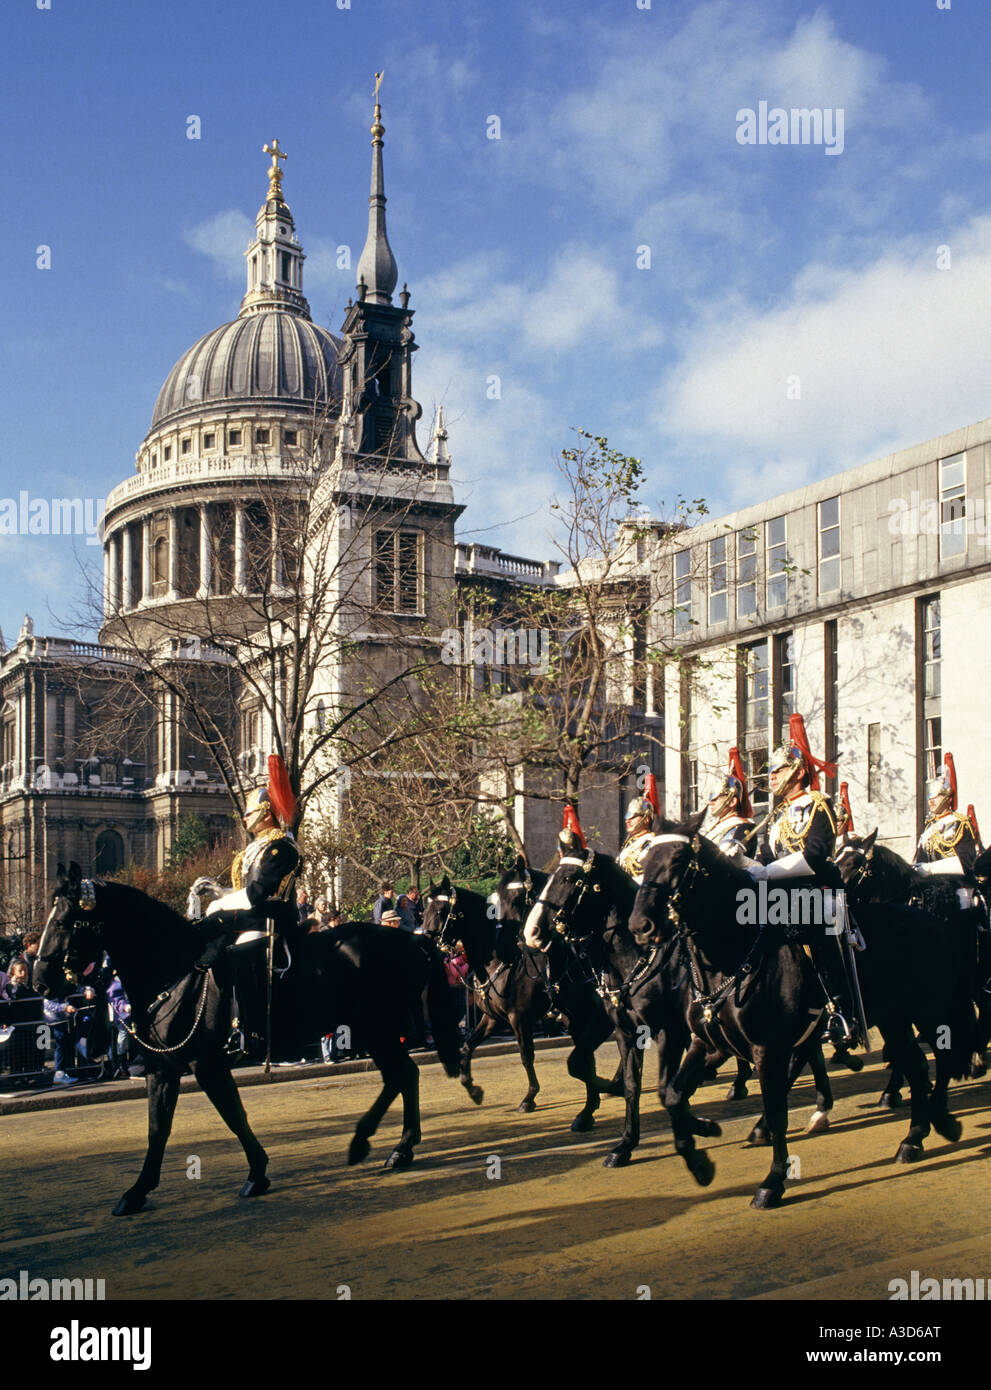 City of London Lord Mayors Show procession & spectators St Pauls Cathedral mounted soldiers & horses of Household cavalry Blues and Royals England UK Stock Photo